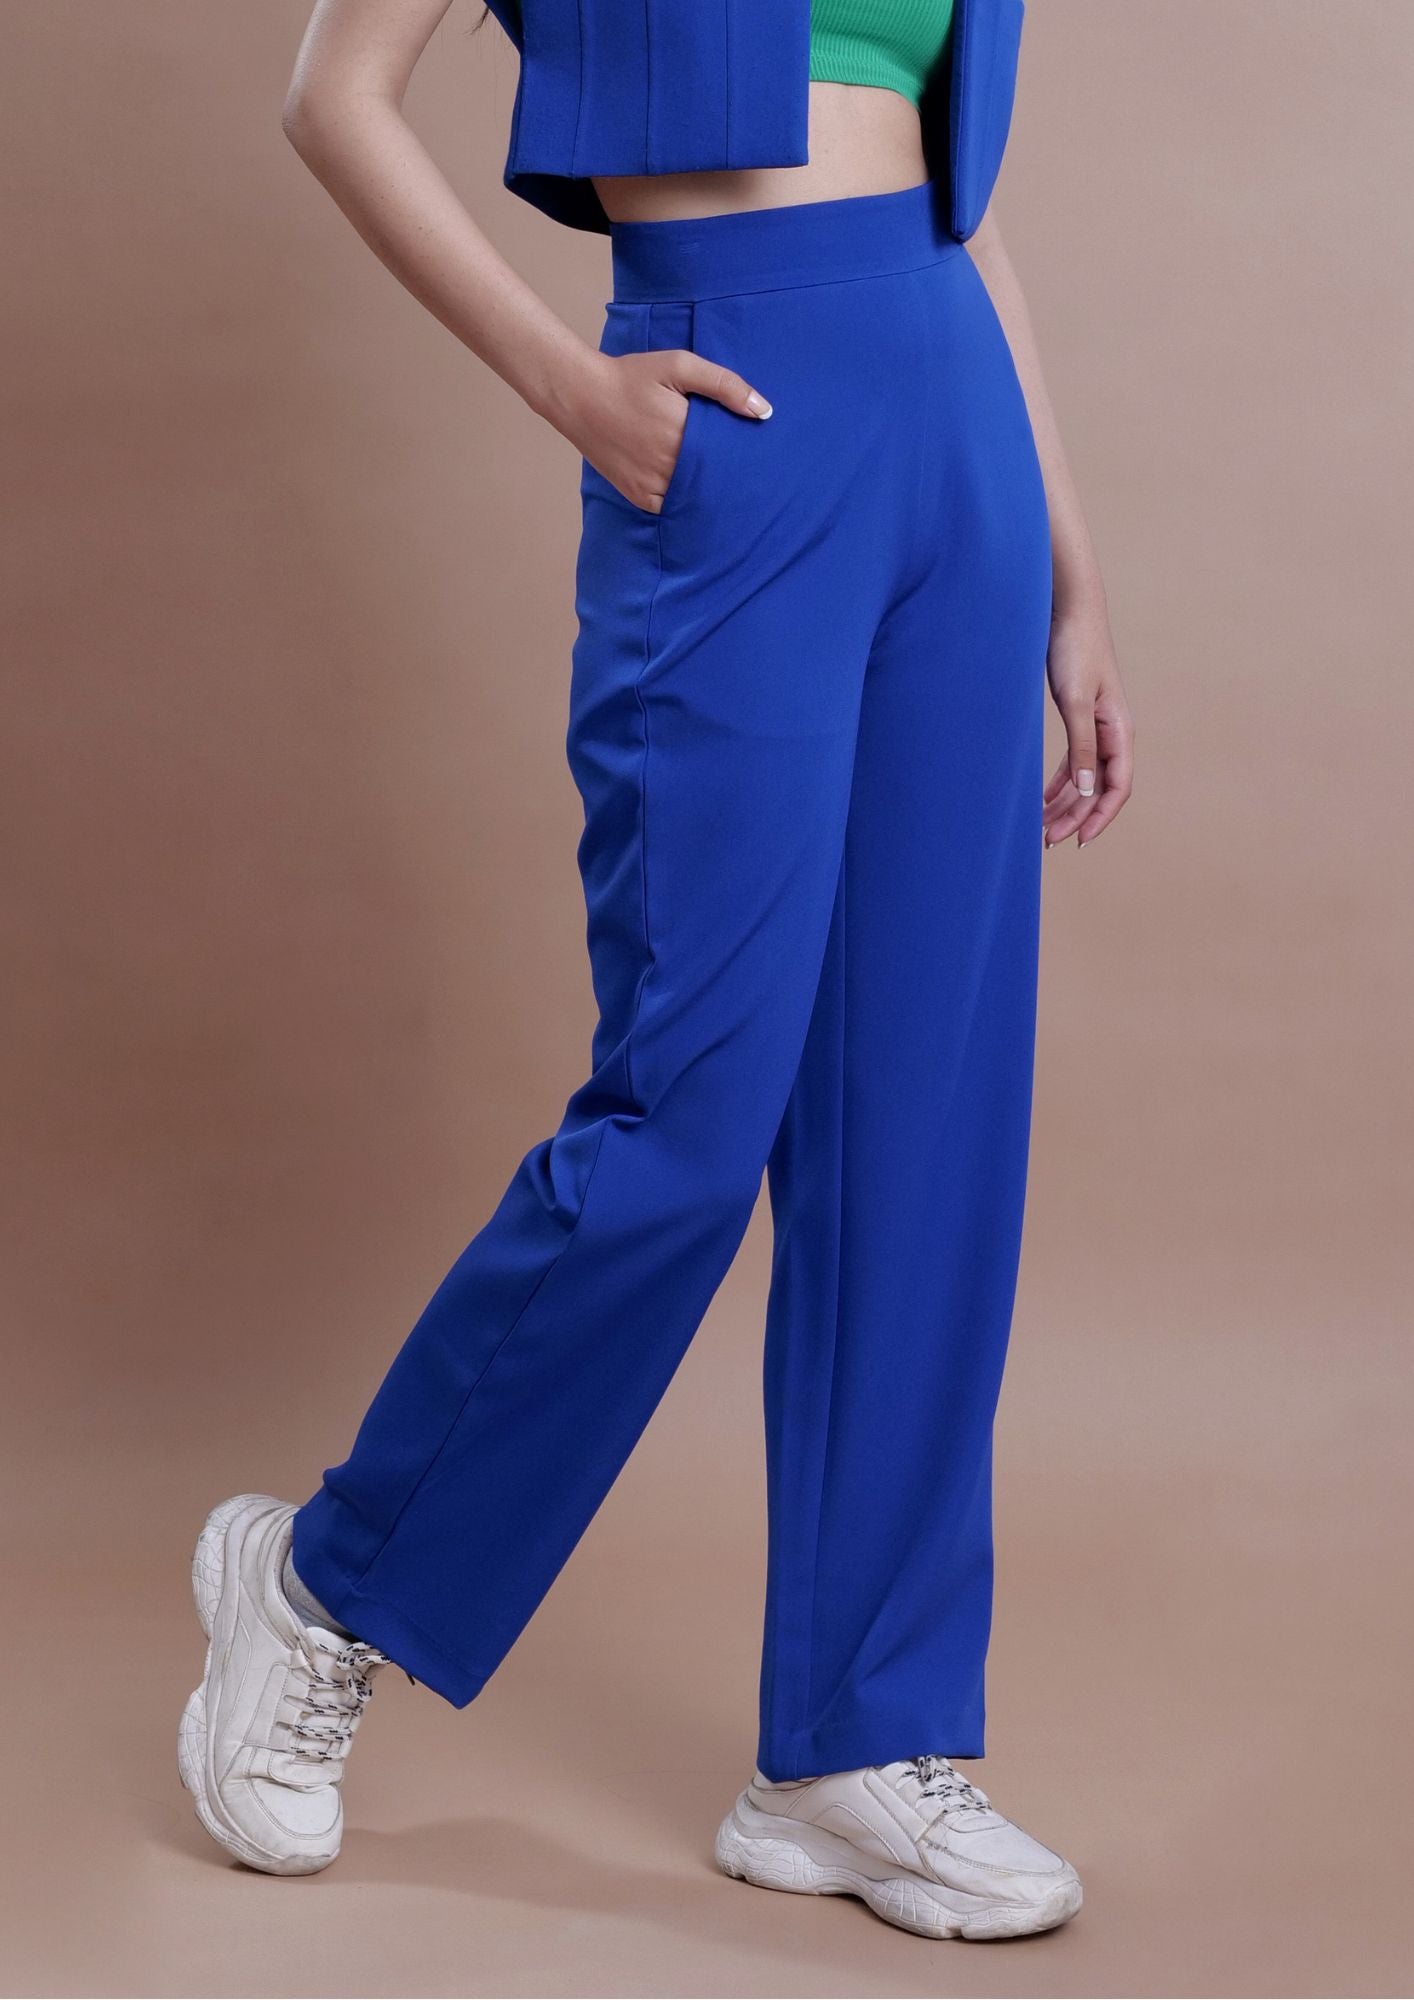 Buy Black Trousers & Pants for Women by The Dapper Lady Online | Ajio.com